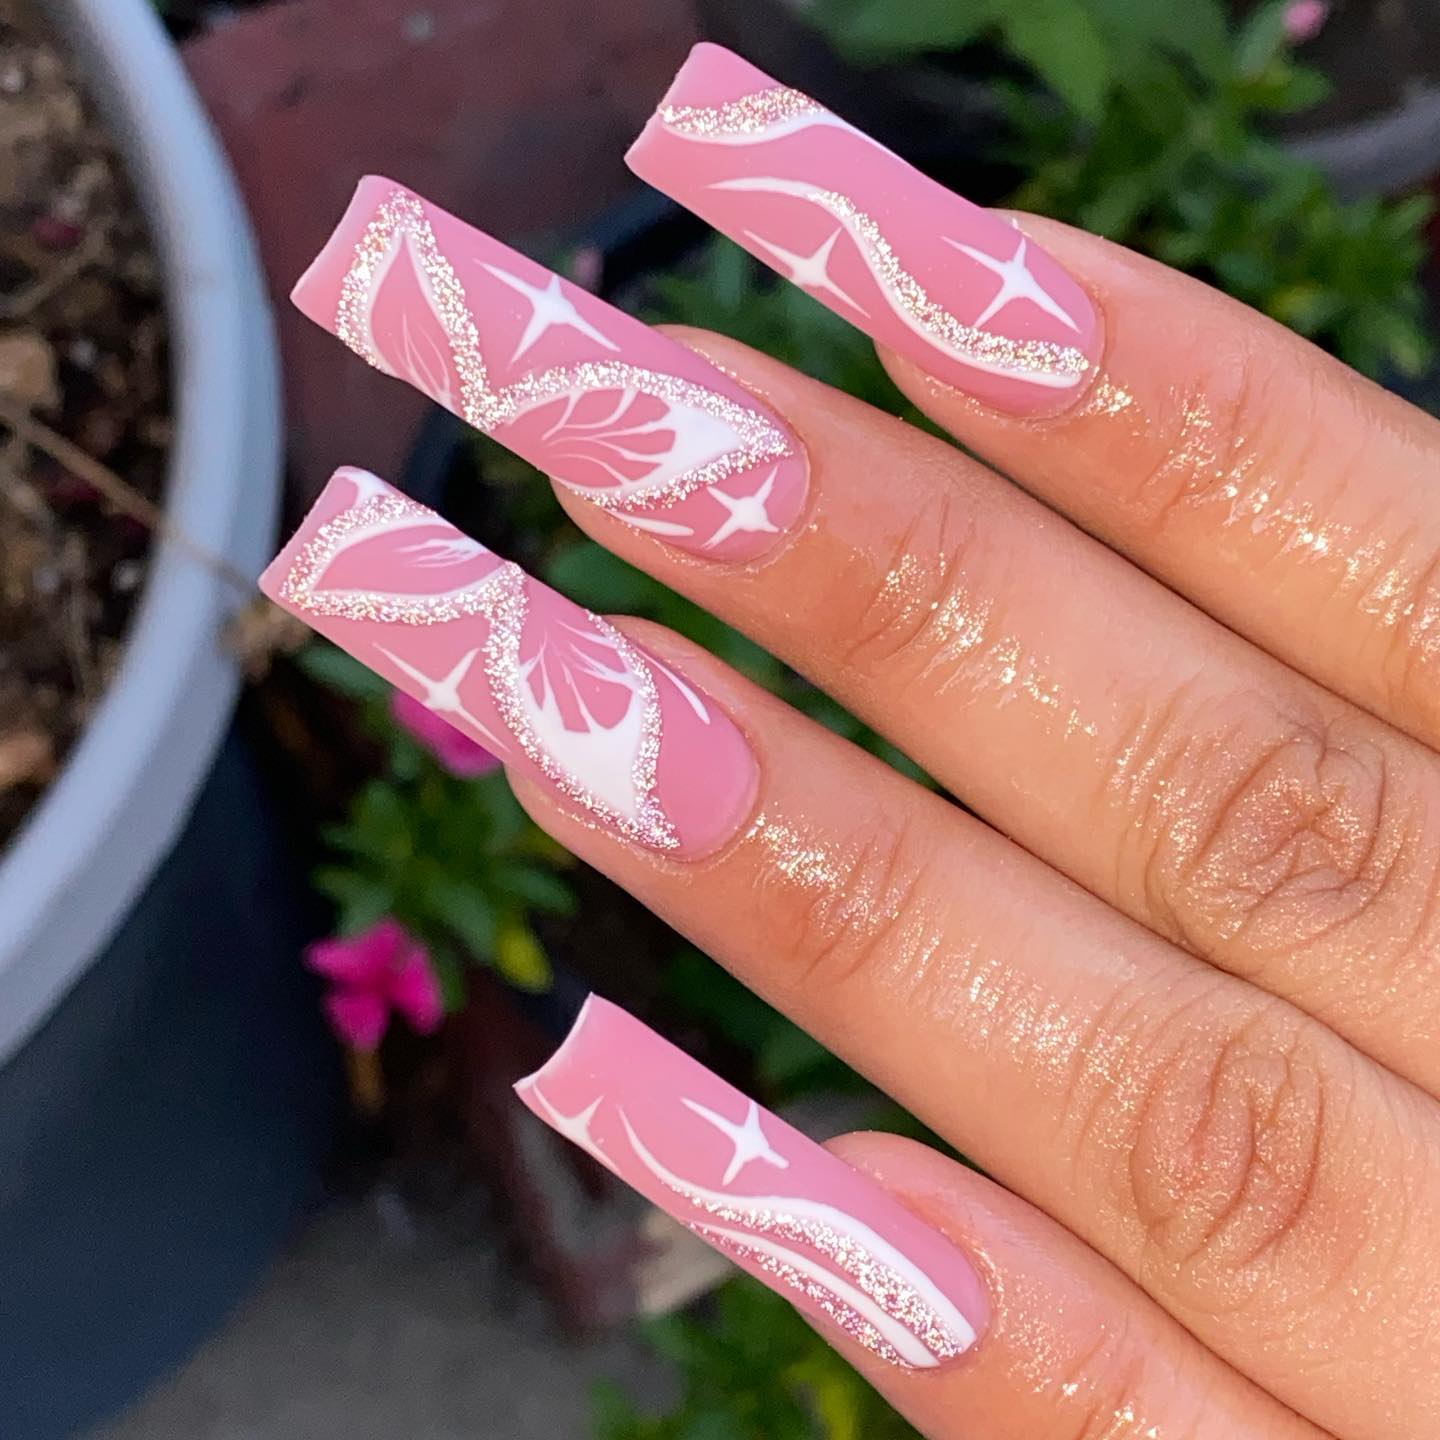 This nail design is for those who doesn't like ordinary or normal nails. You can create the image of butterfly with silvery lines.